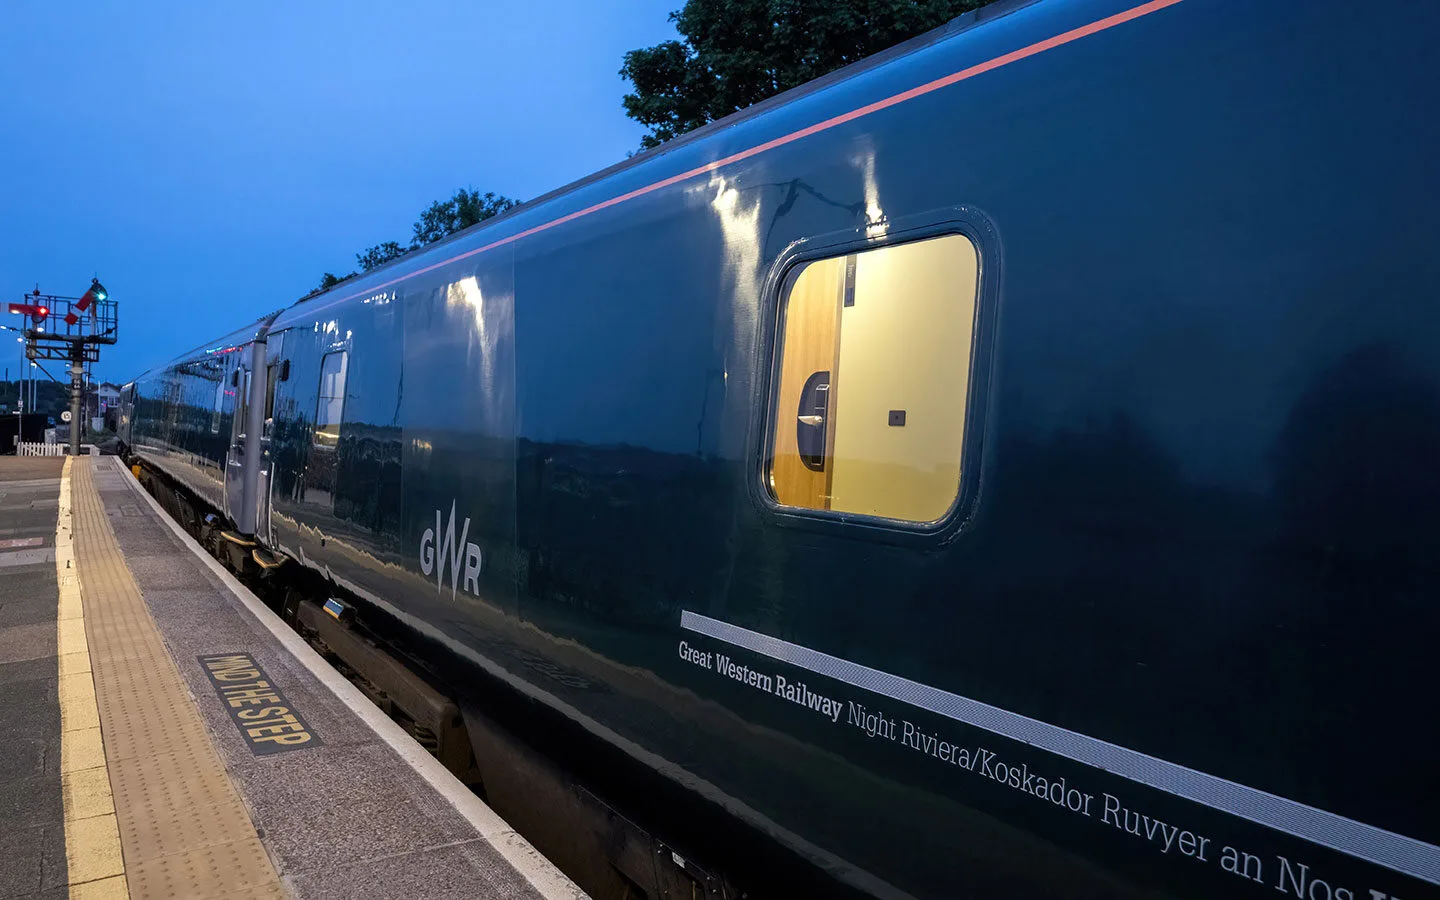 The Night Riviera Sleeper train at the station in St Erth